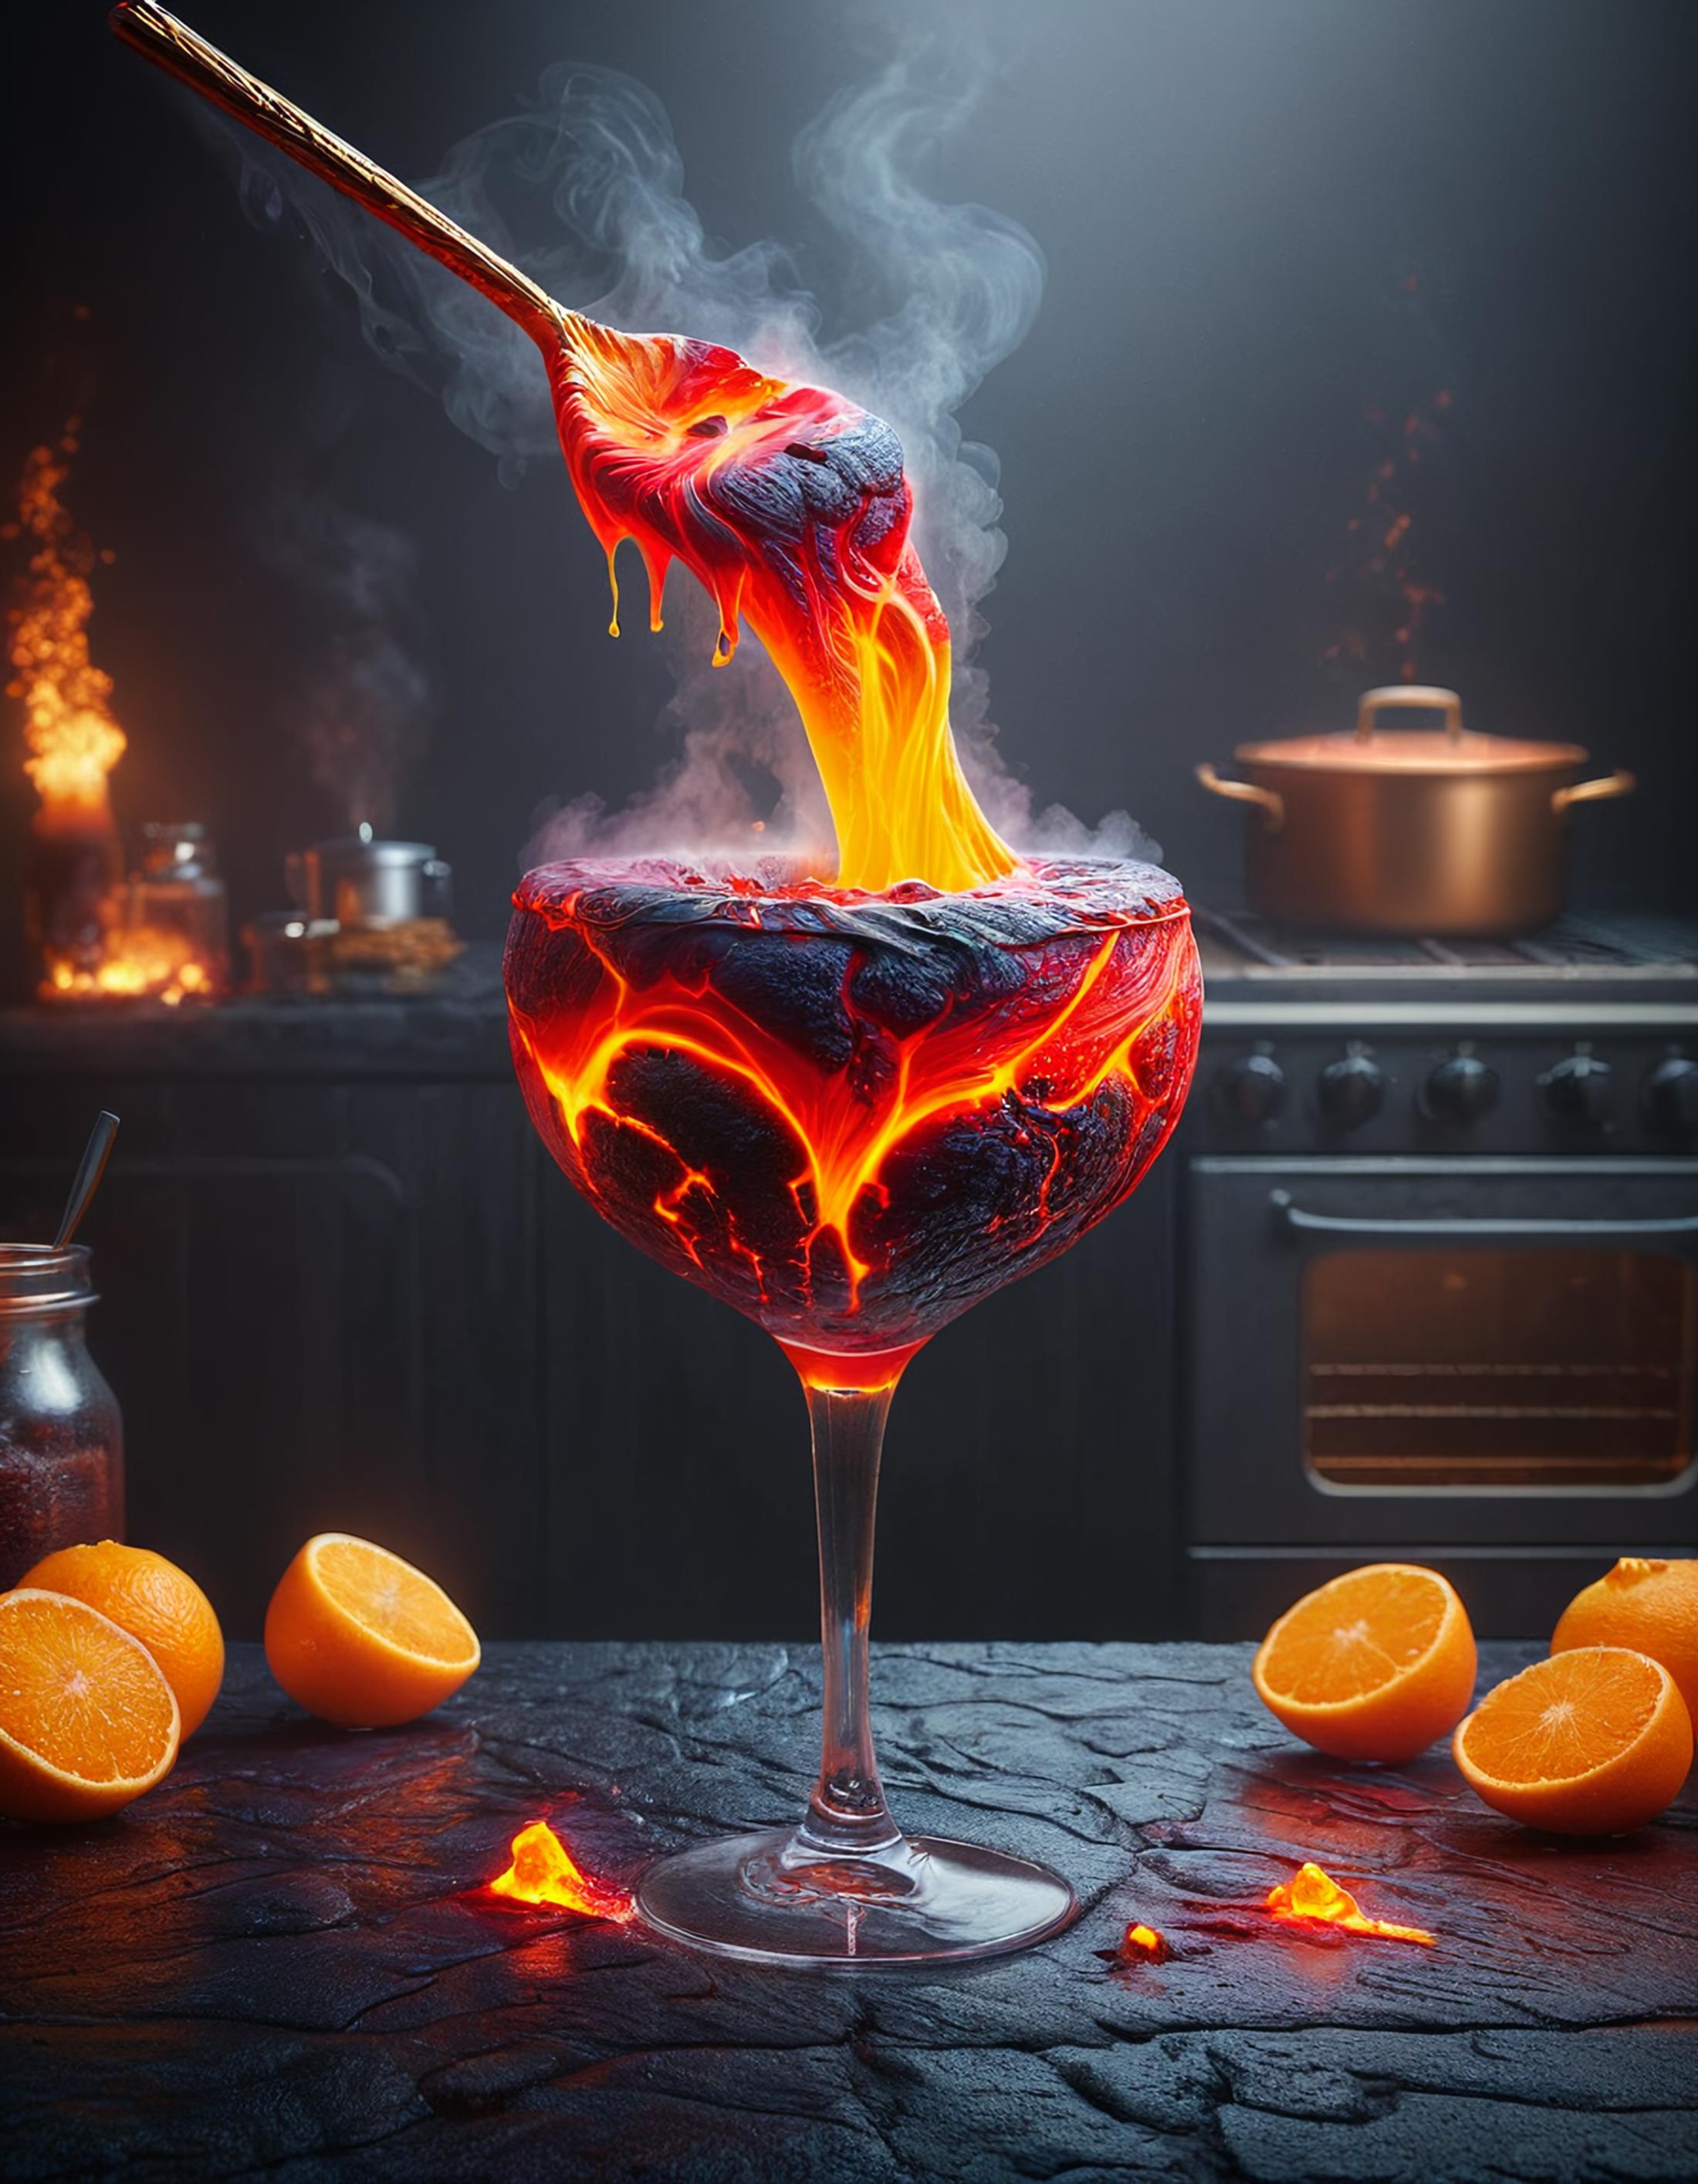 A Volcano Erupting in a Wine Glass with Oranges on the Table